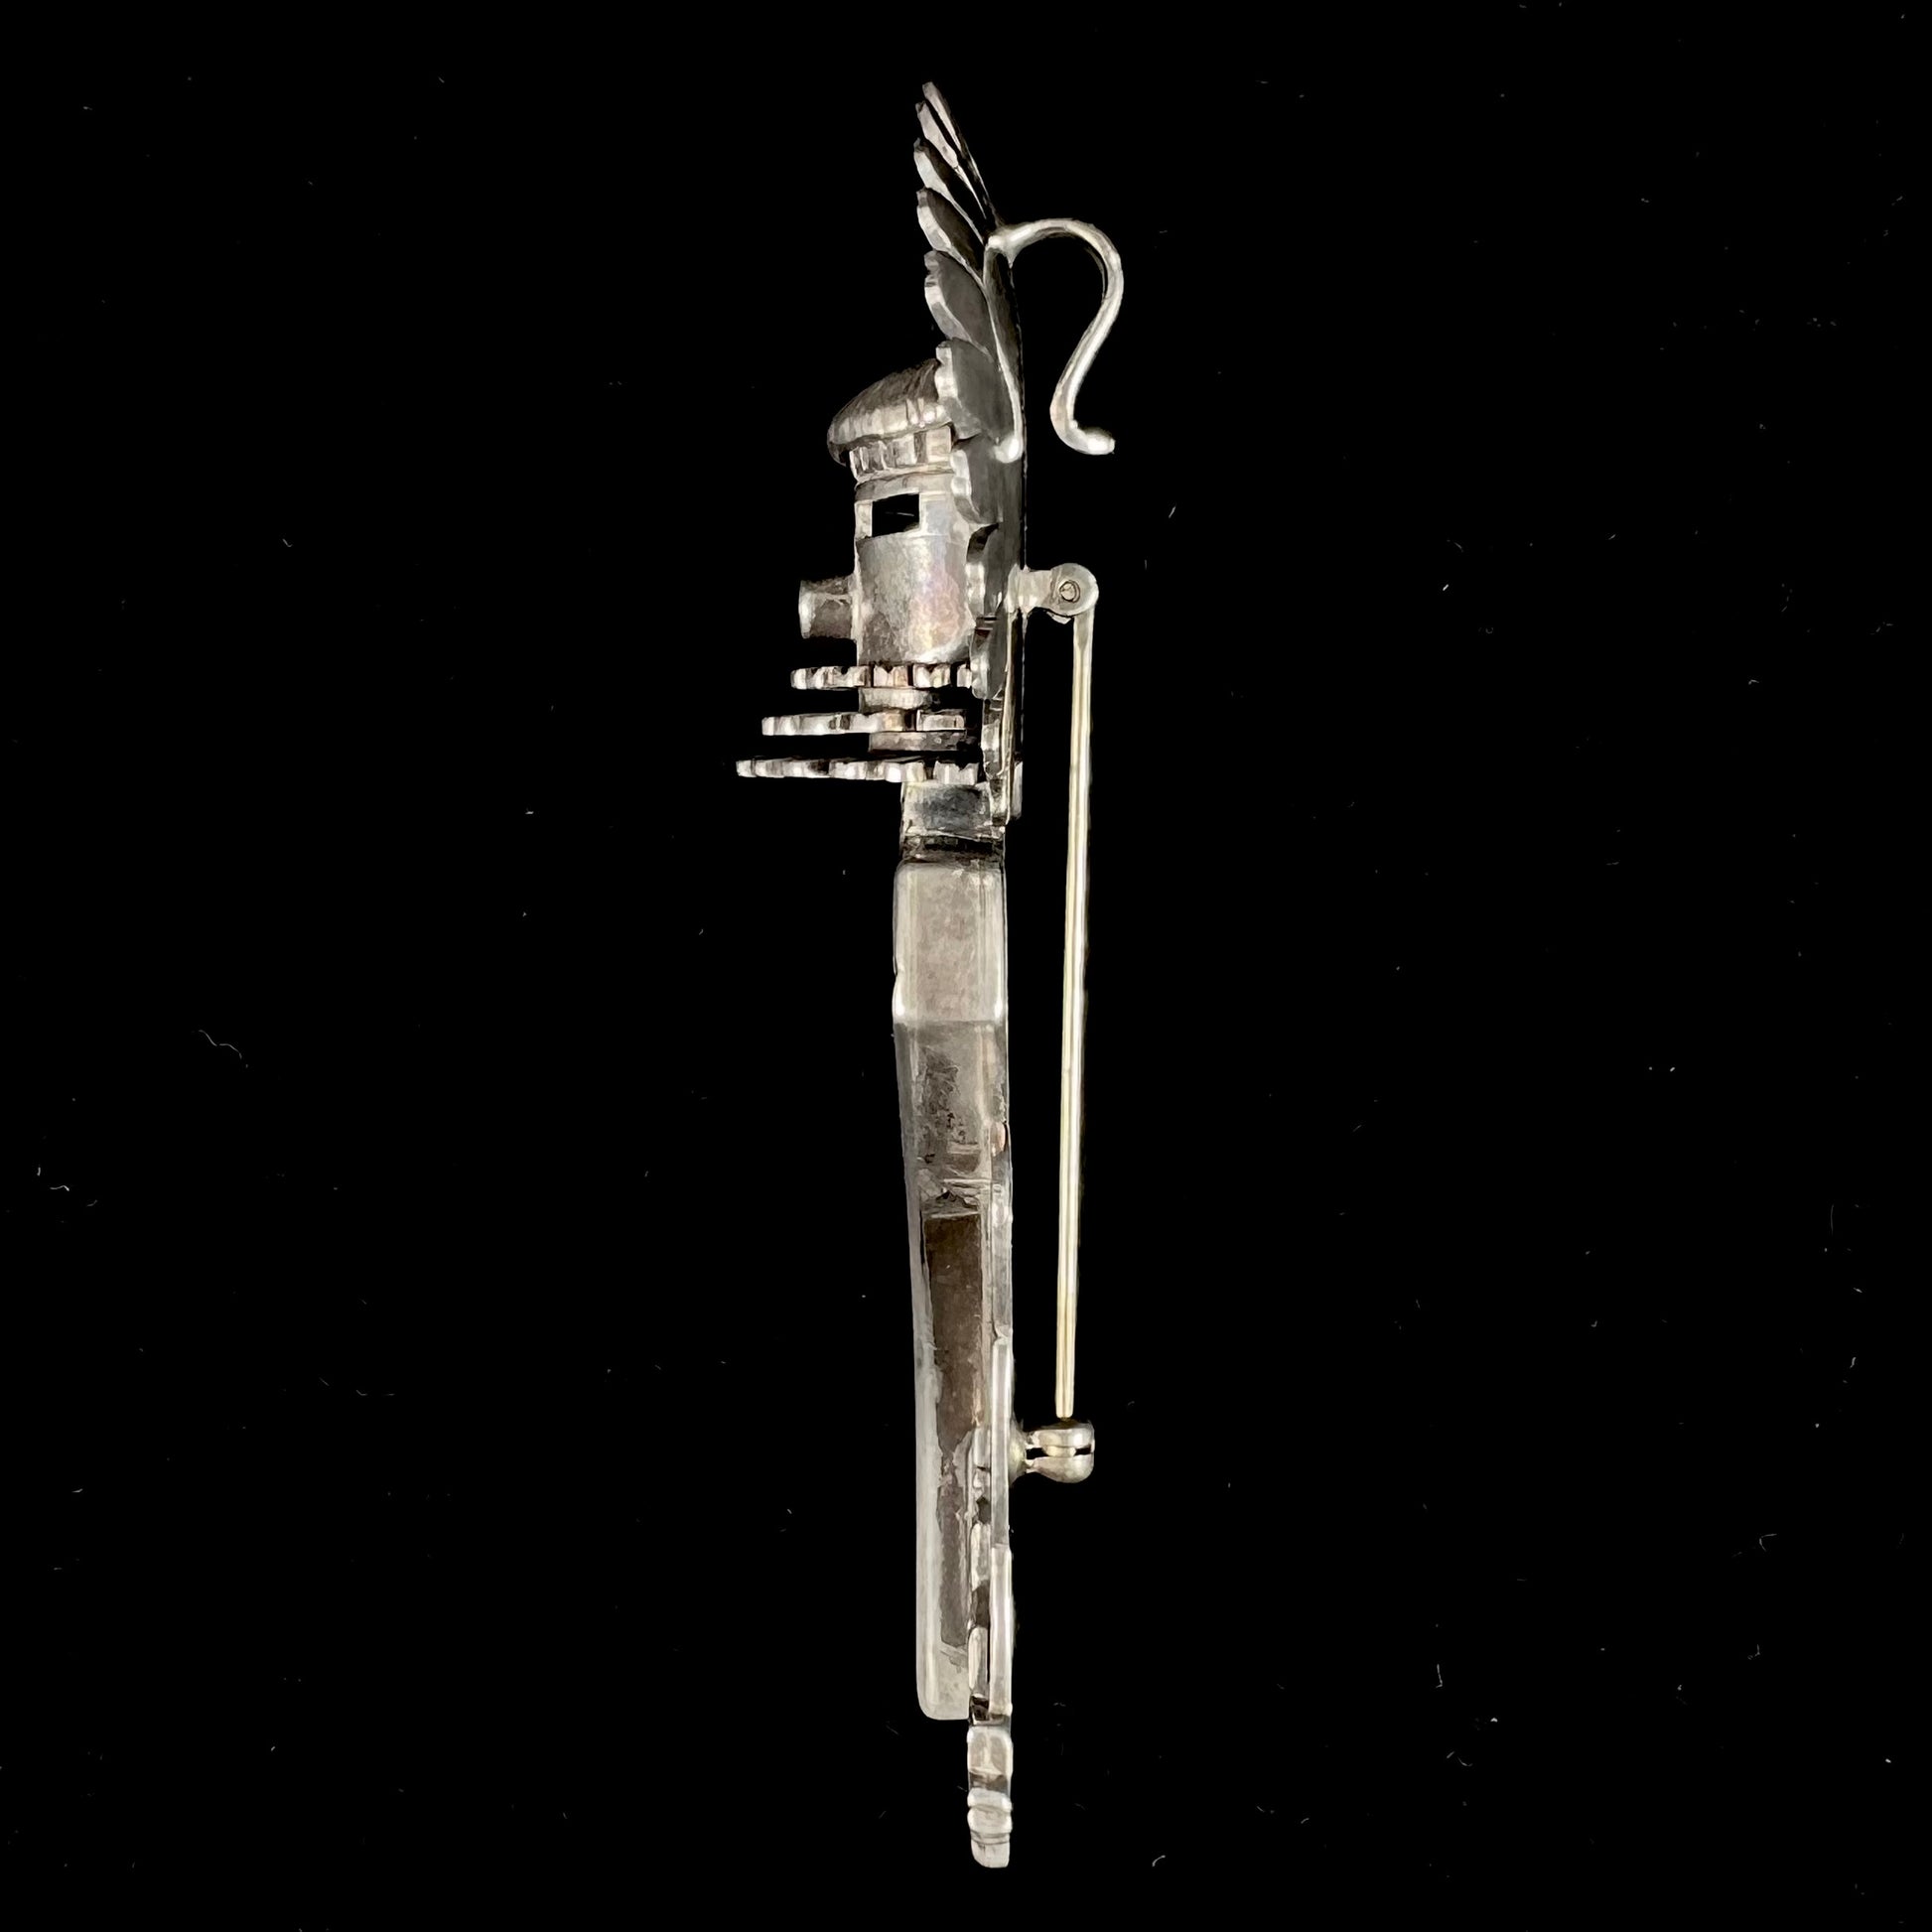 A Morning Singer kachina doll pendant made from sterling silver by Navajo artist Bennie Ration.